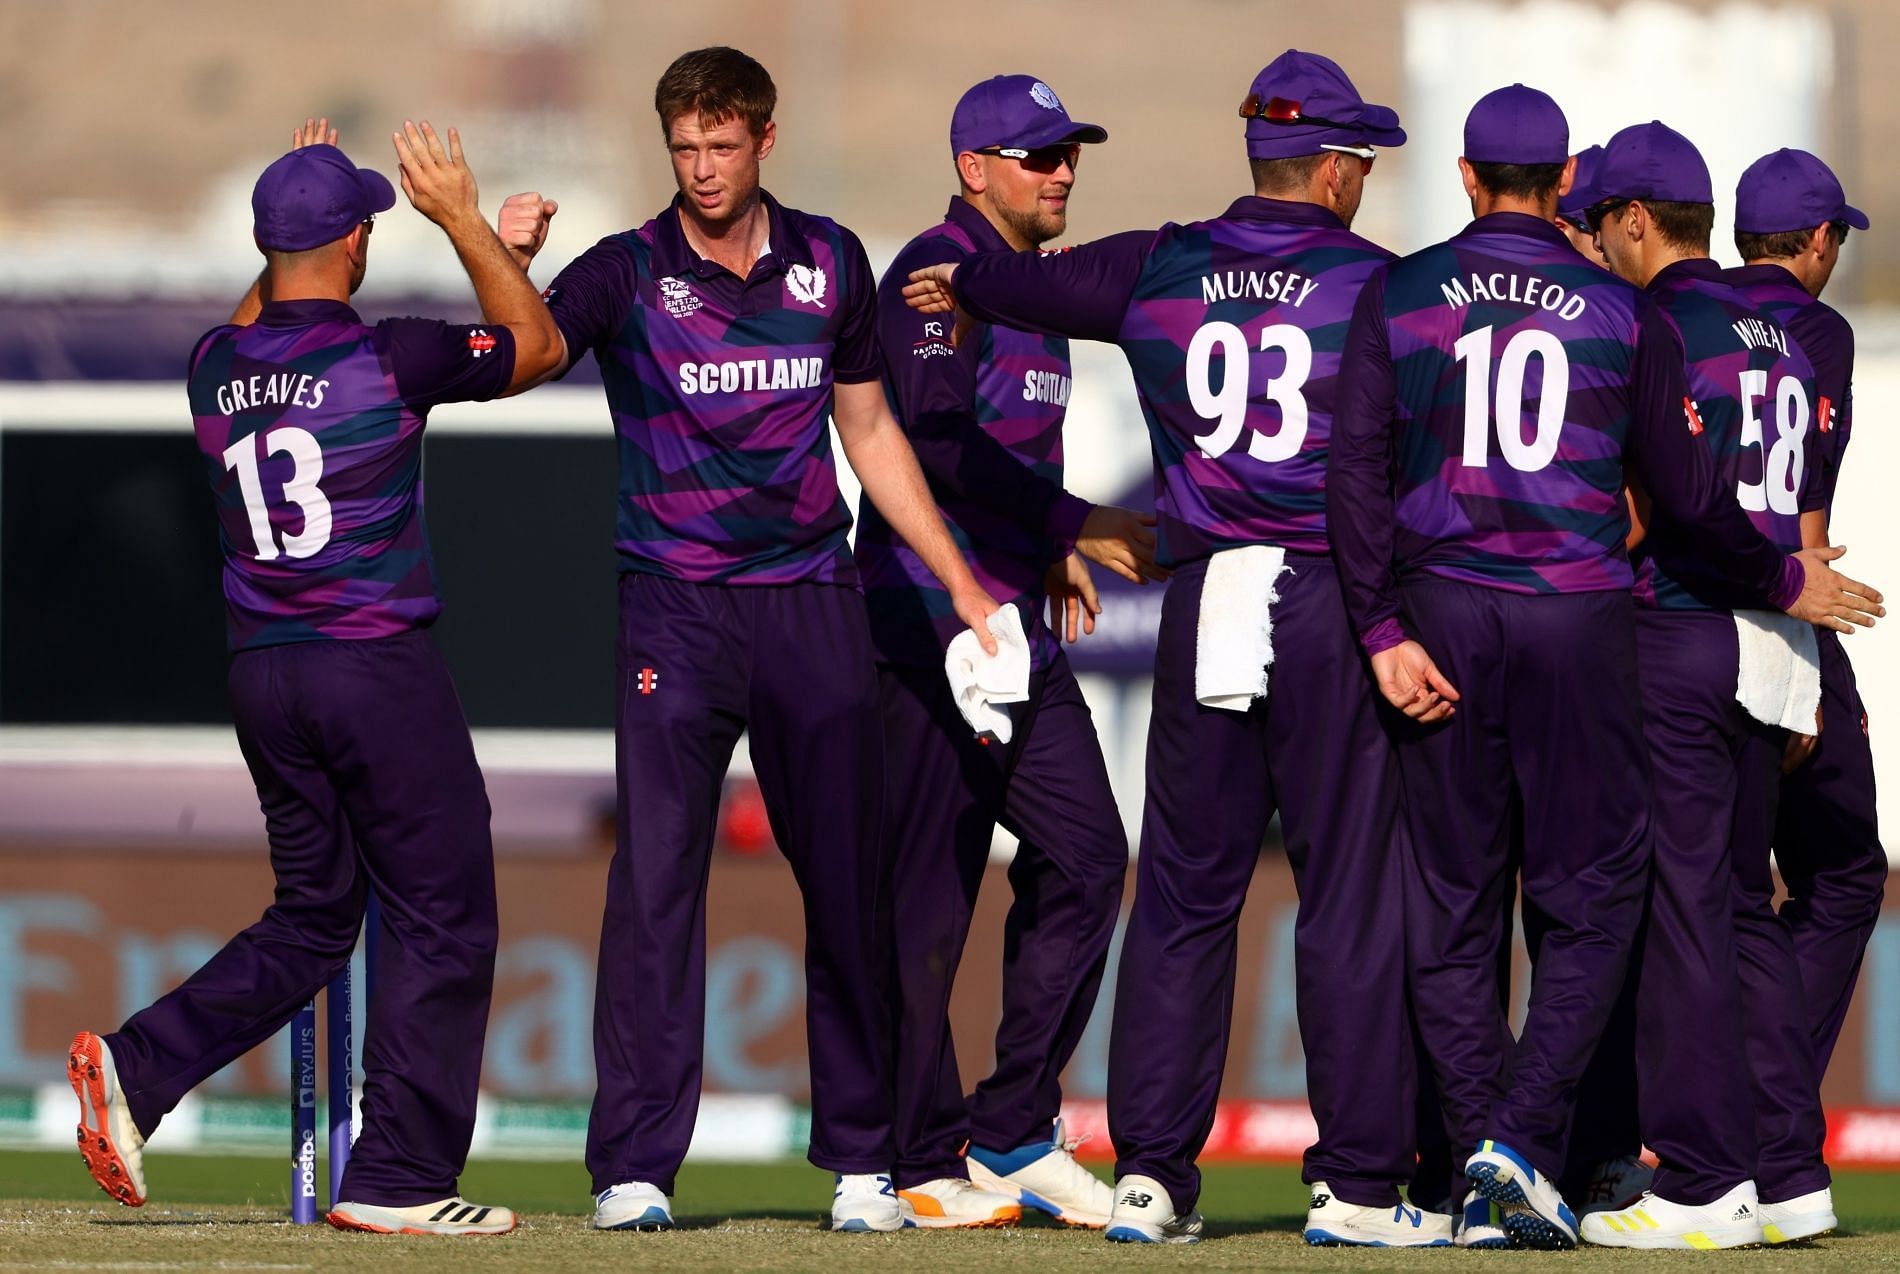 Scotland players celebrate a wicket. Pic: T20WorldCup/ Twitter